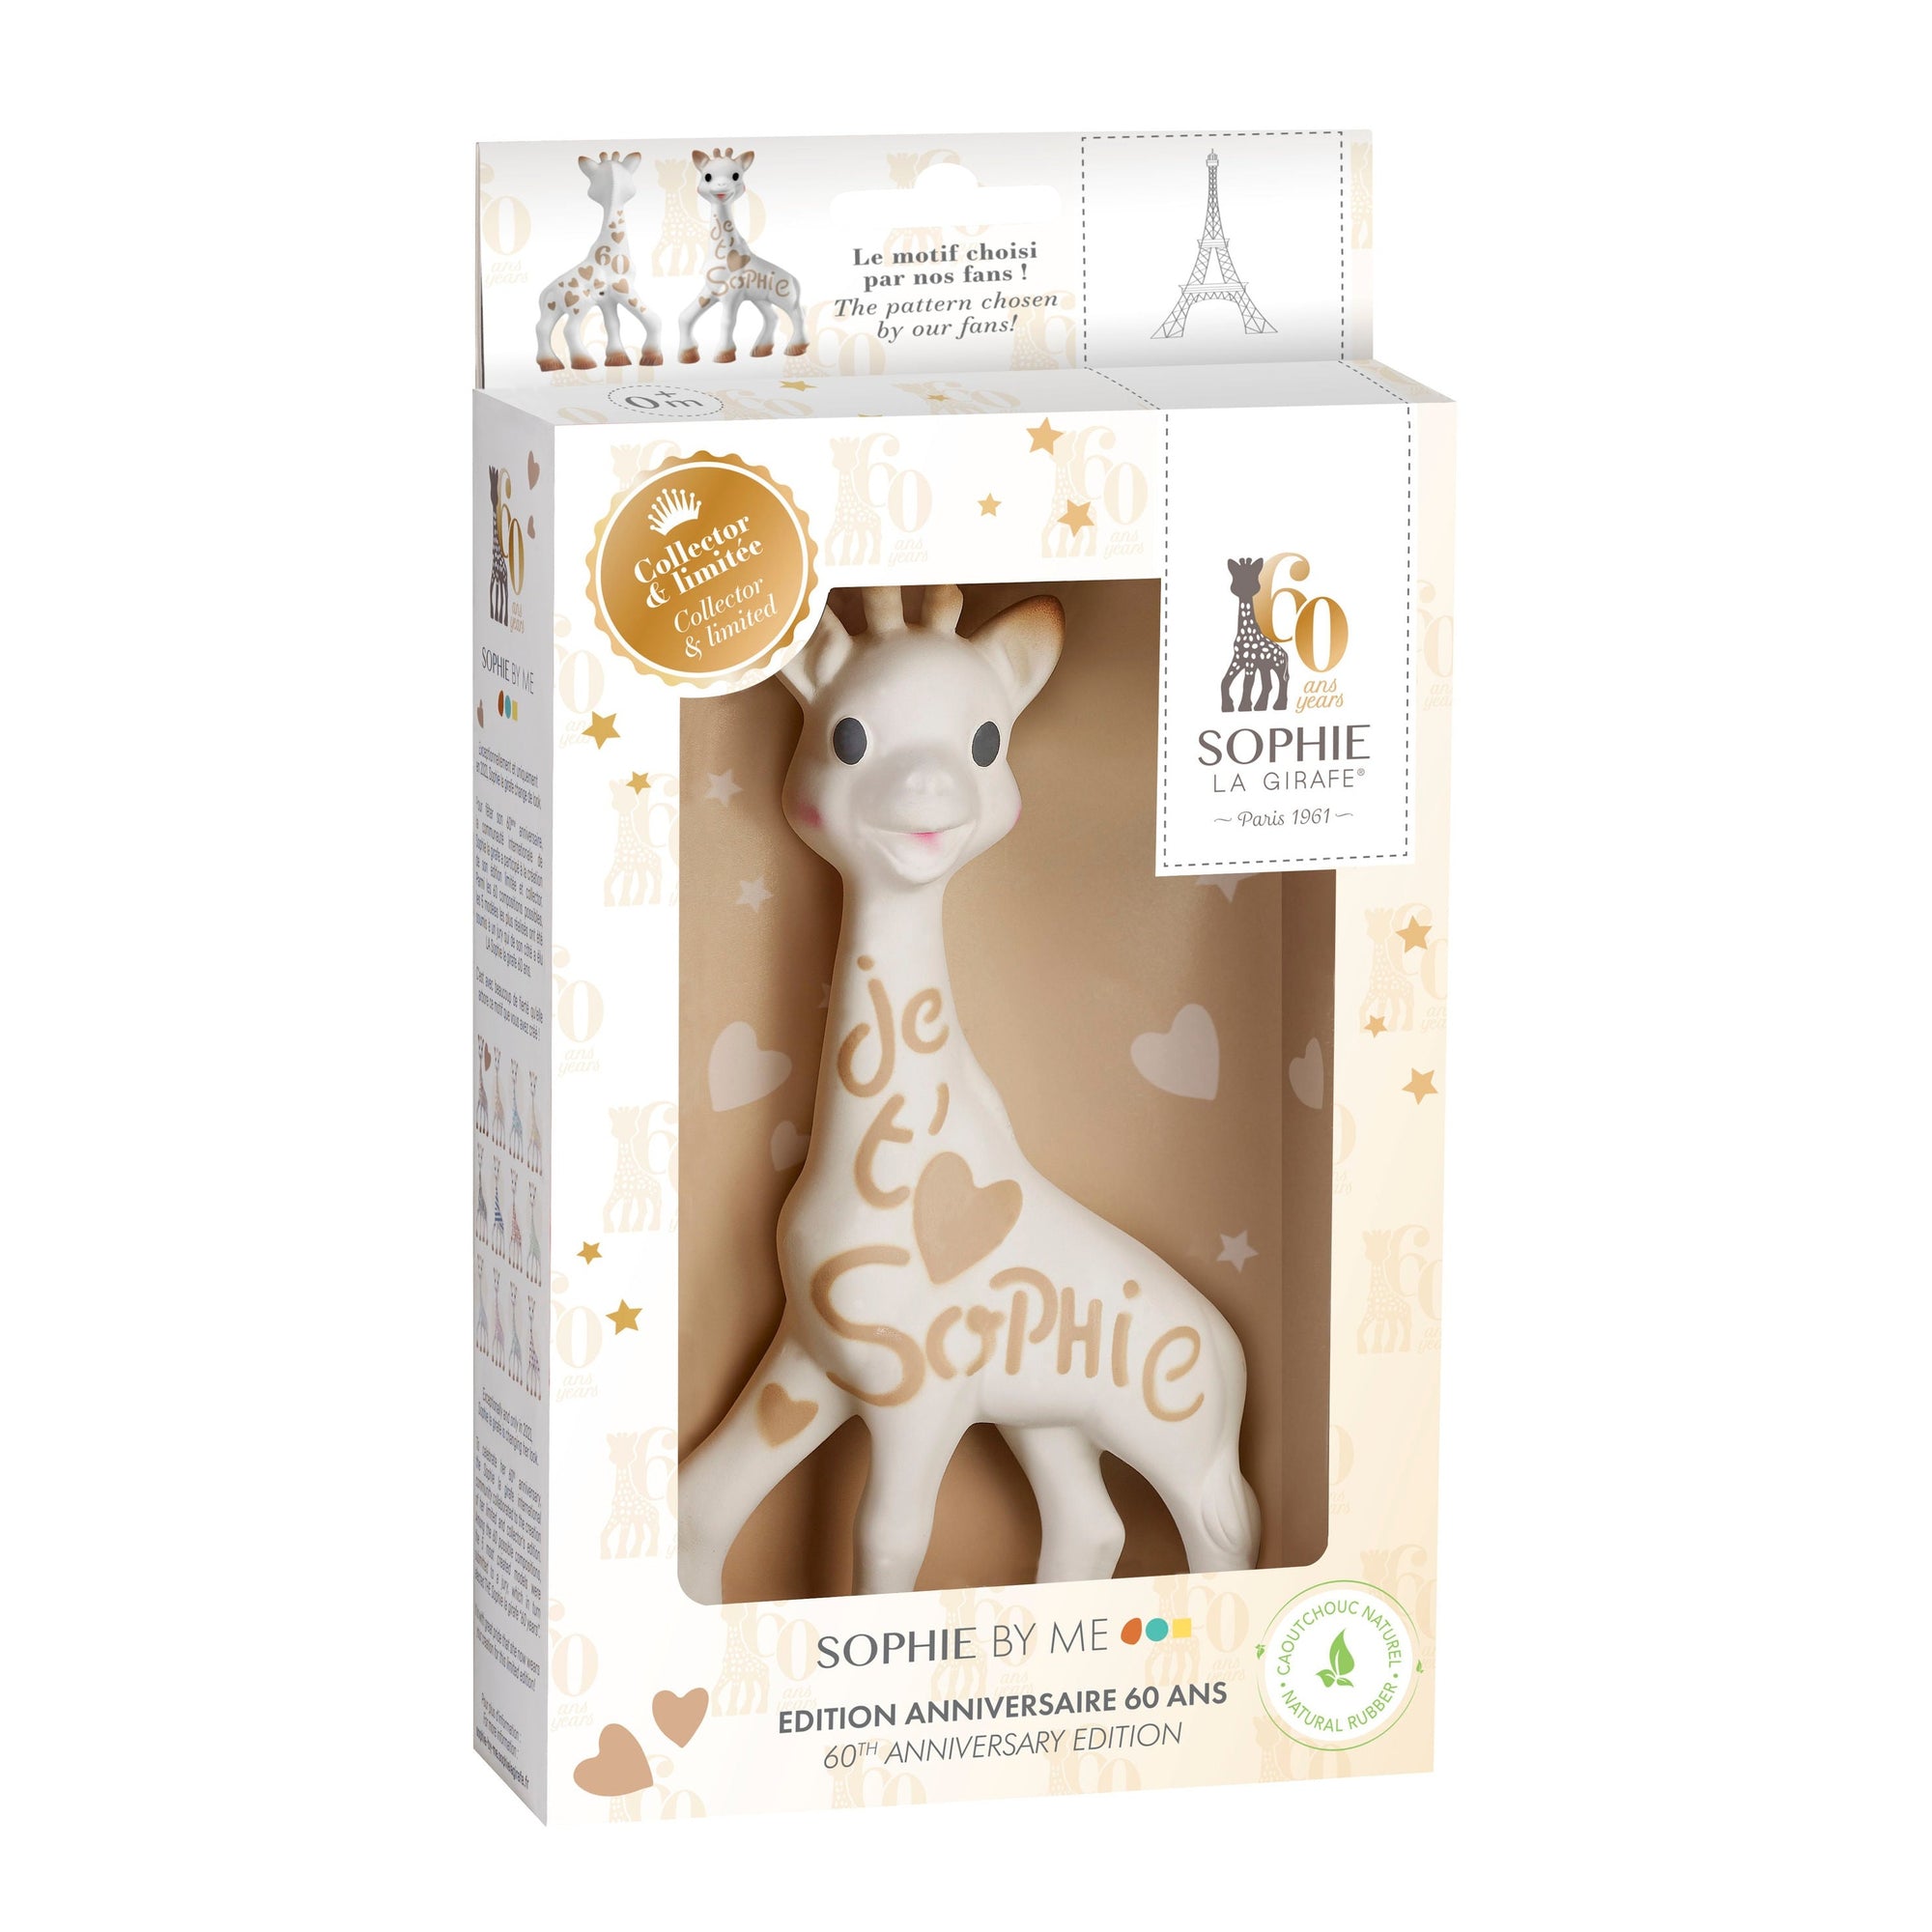 Sophie La Girafe teether - angus and dudley